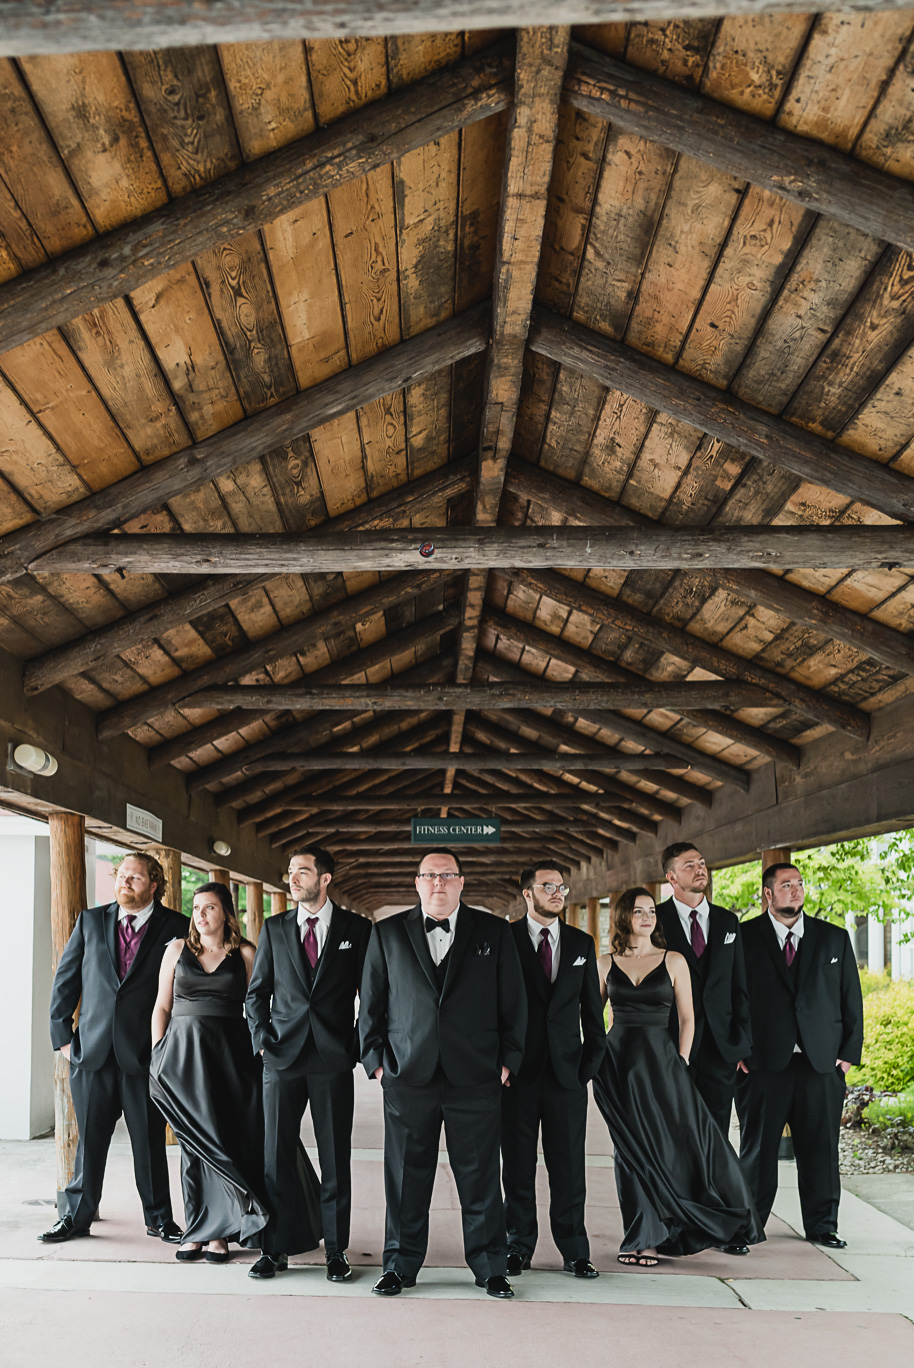 Black tuxedo and black floor length bridesmaid dresses. Twigs & Branches unstructured peony wedding bouquet. An intimate destination Mackinac Island wedding at Mission Point Resort with a cranberry and black color palette provided by Kari Dawson, top-rated Northern Michigan wedding photographer, and her team.